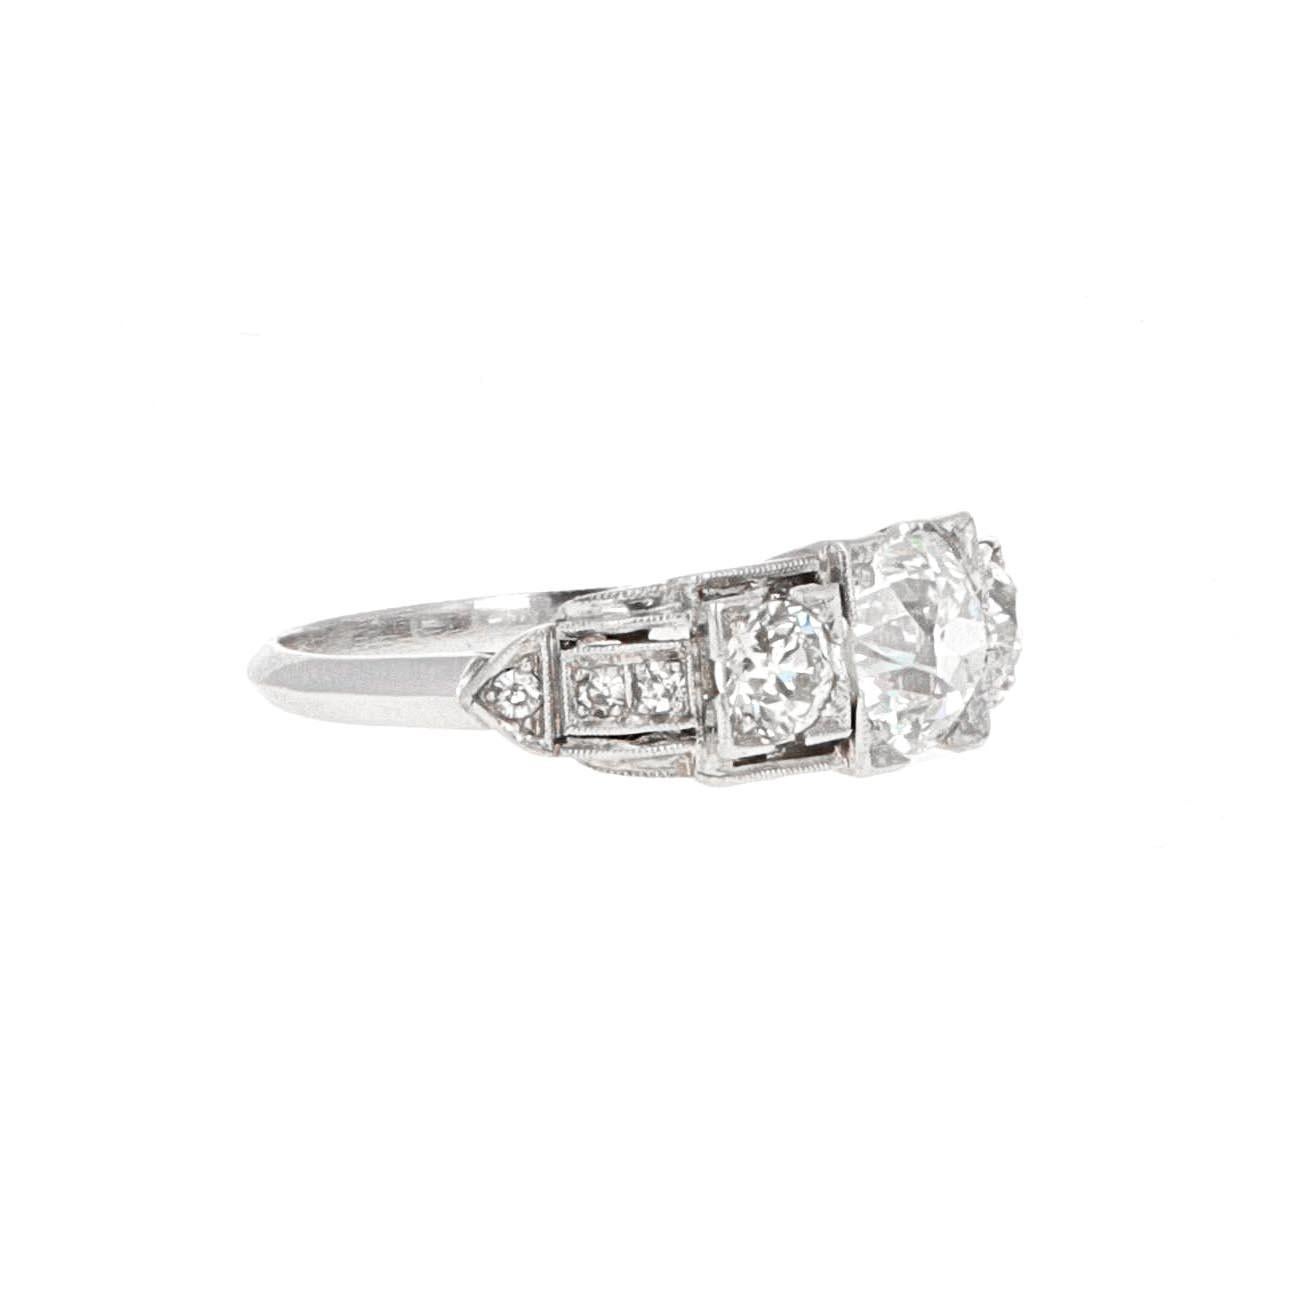 Platinum art deco three-stone diamond ring. The ring has a center diamond weighing 1.16 carats. The center stone is  an old european cut diamond. 
The ring is in excellent condition